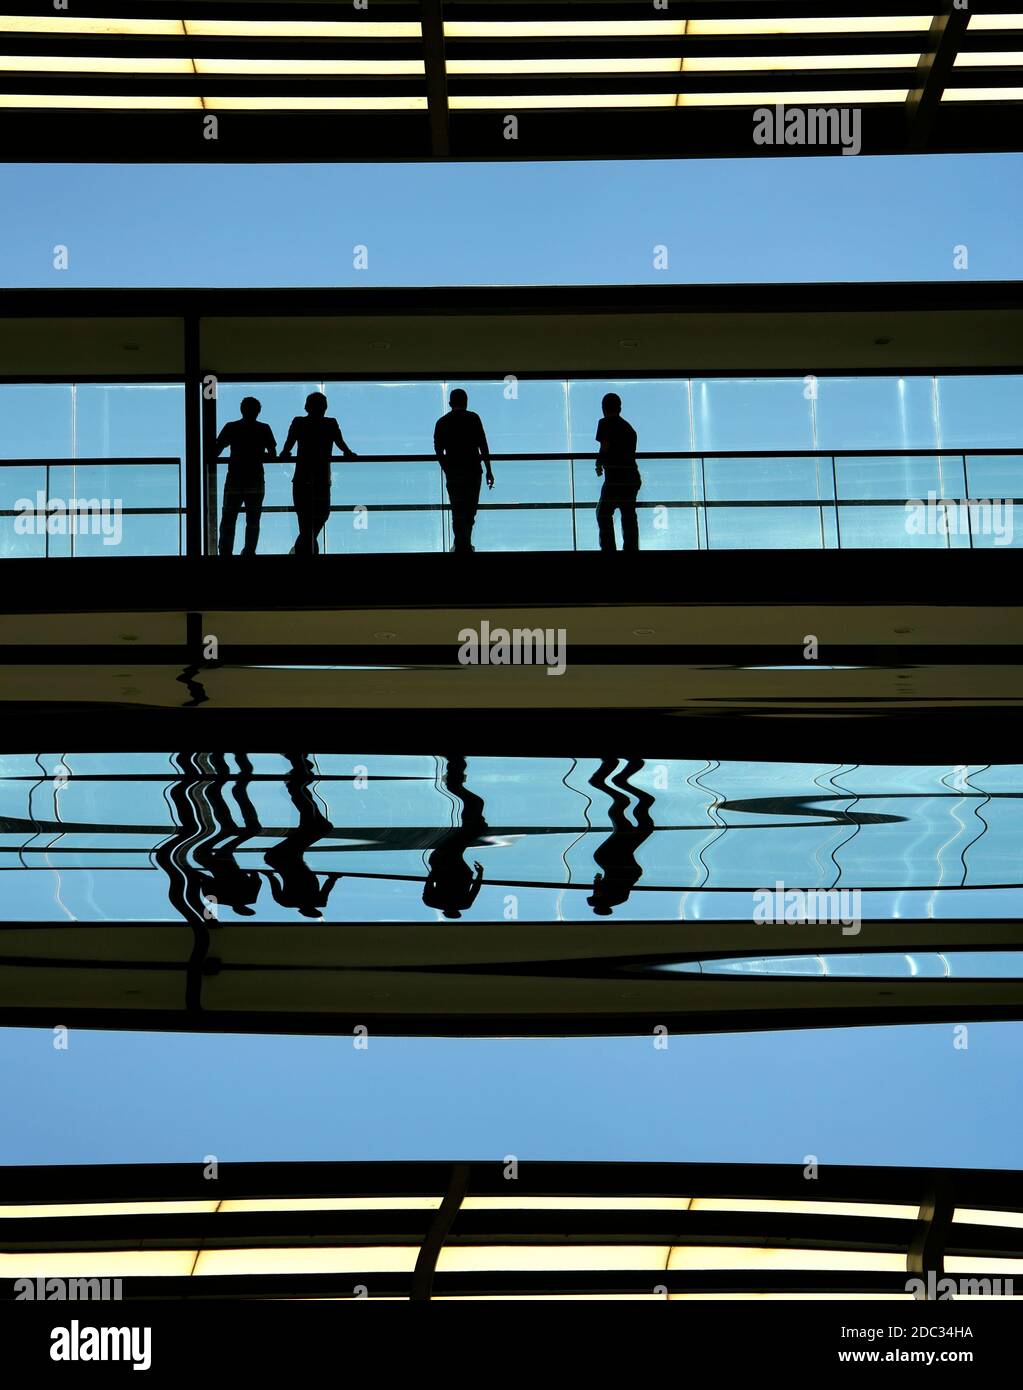 workers inside the modern building in silhouette Stock Photo